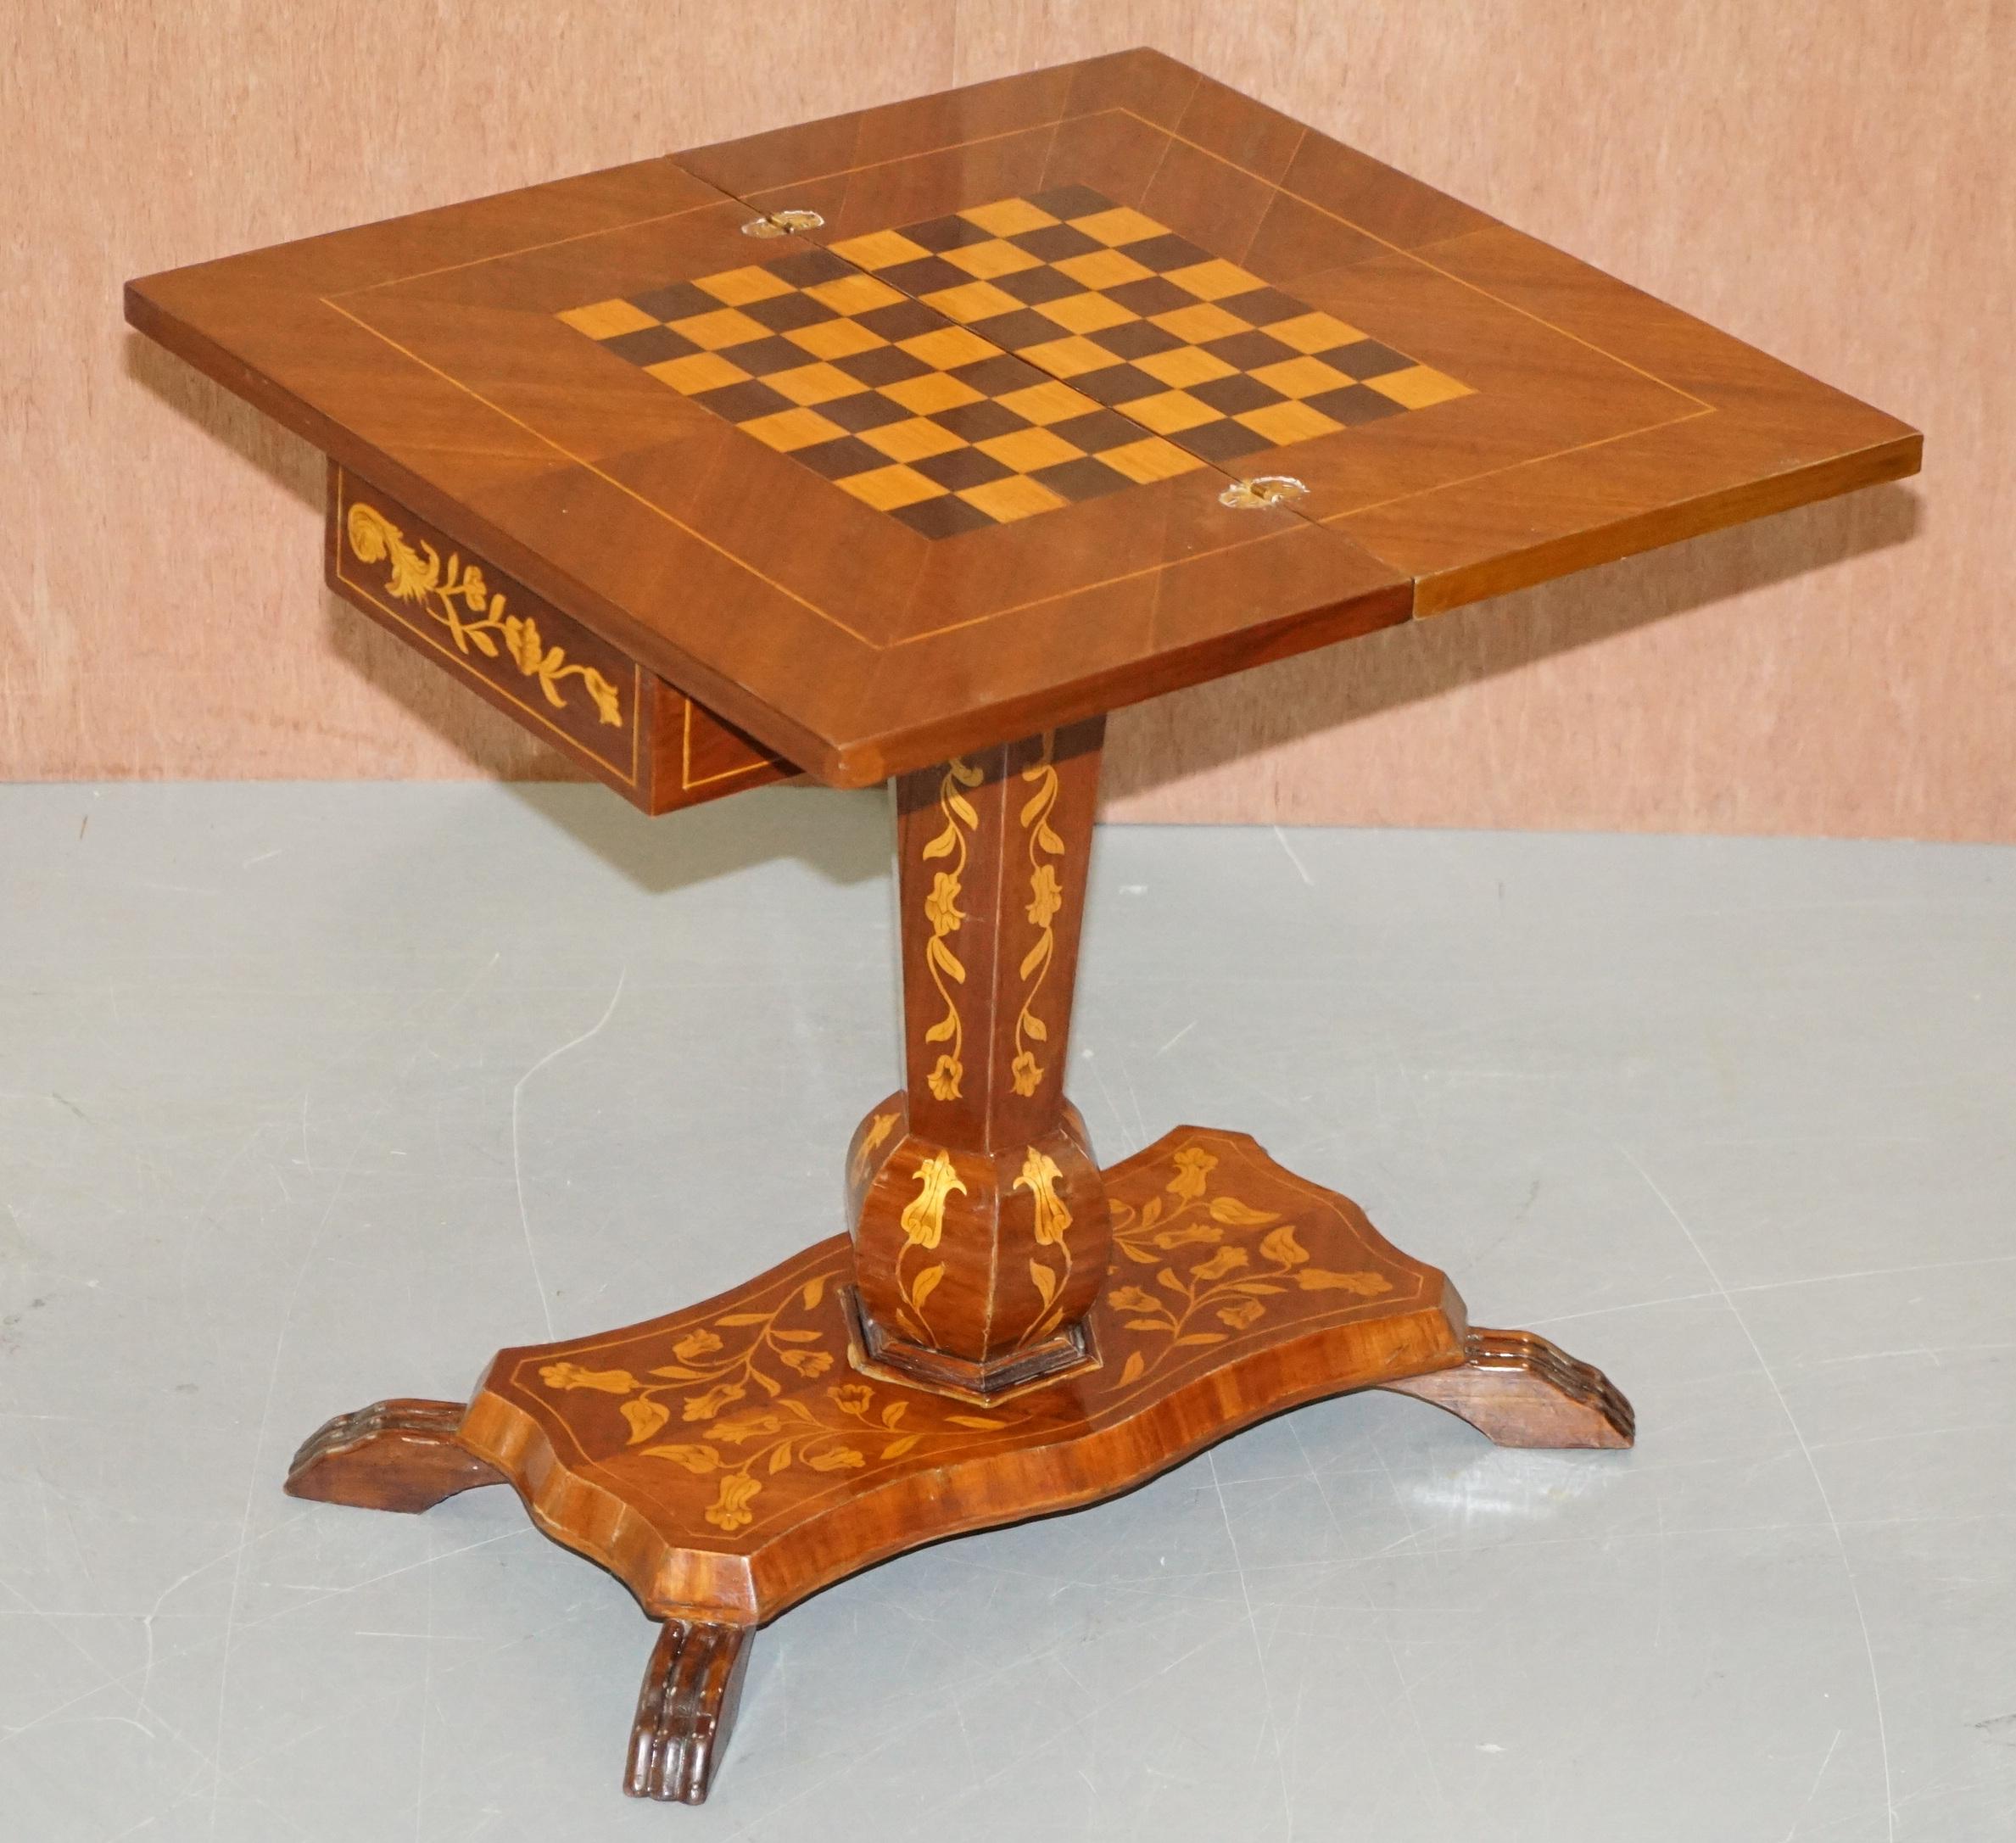 Sublime Antique Dutch Games Card Table with Chess Board Top Marquetry Inlaid 7